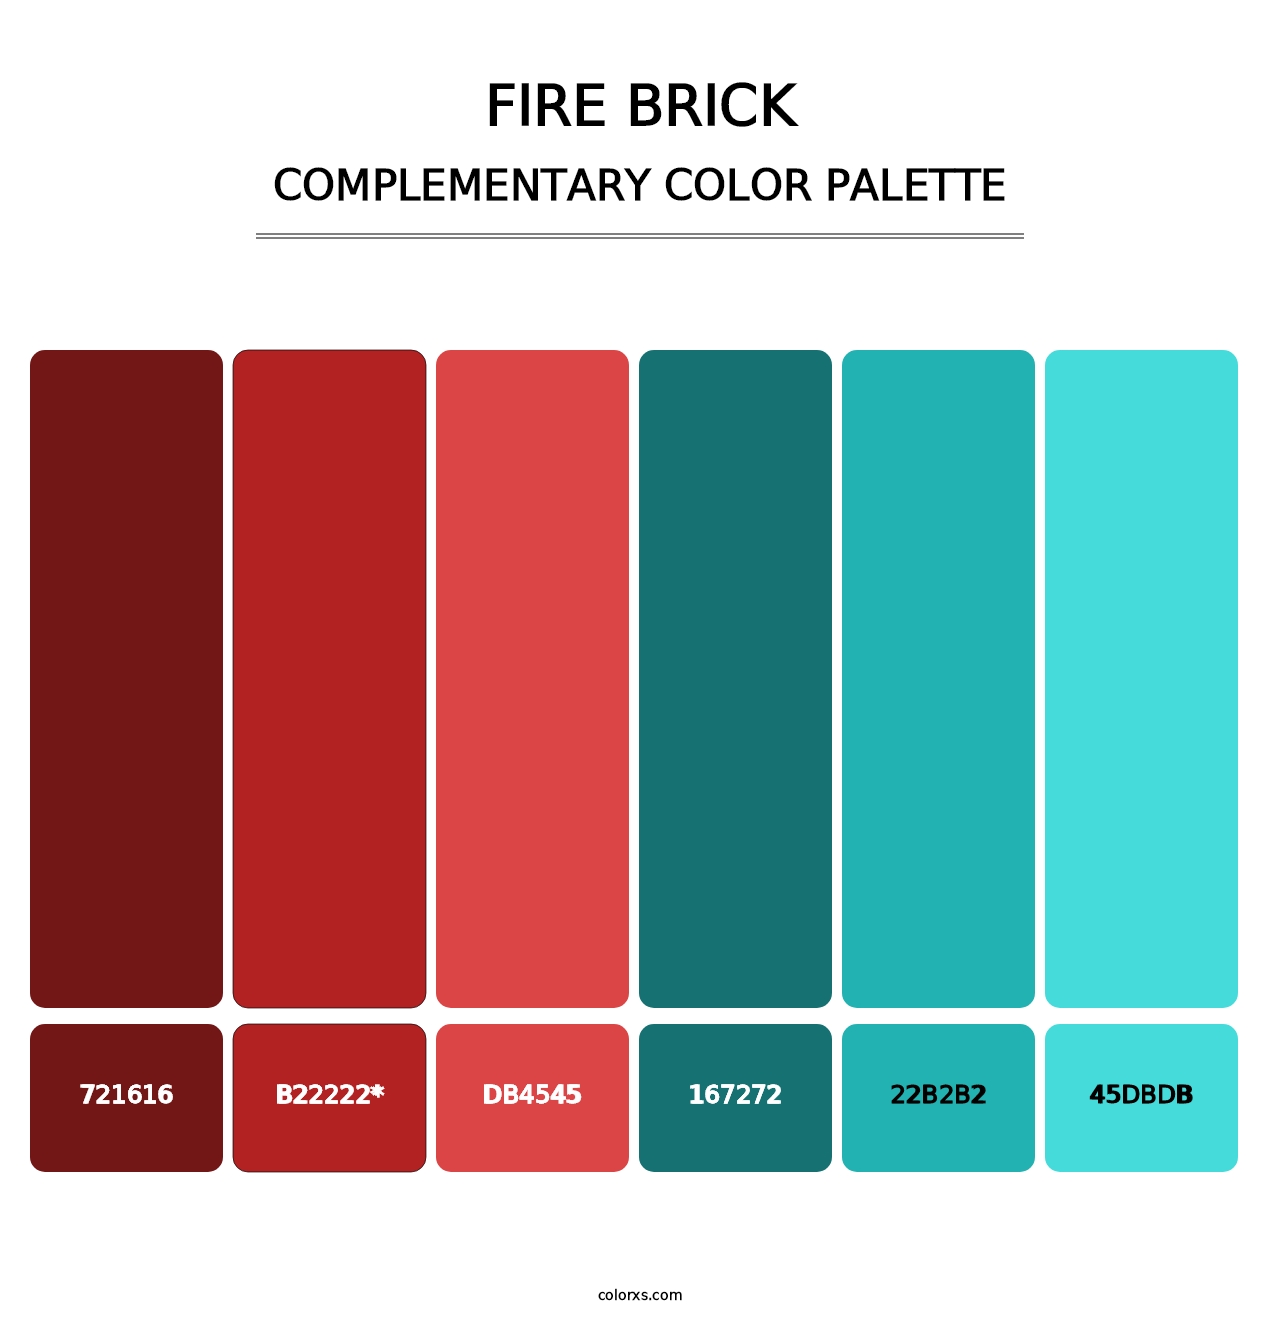 Fire Brick - Complementary Color Palette